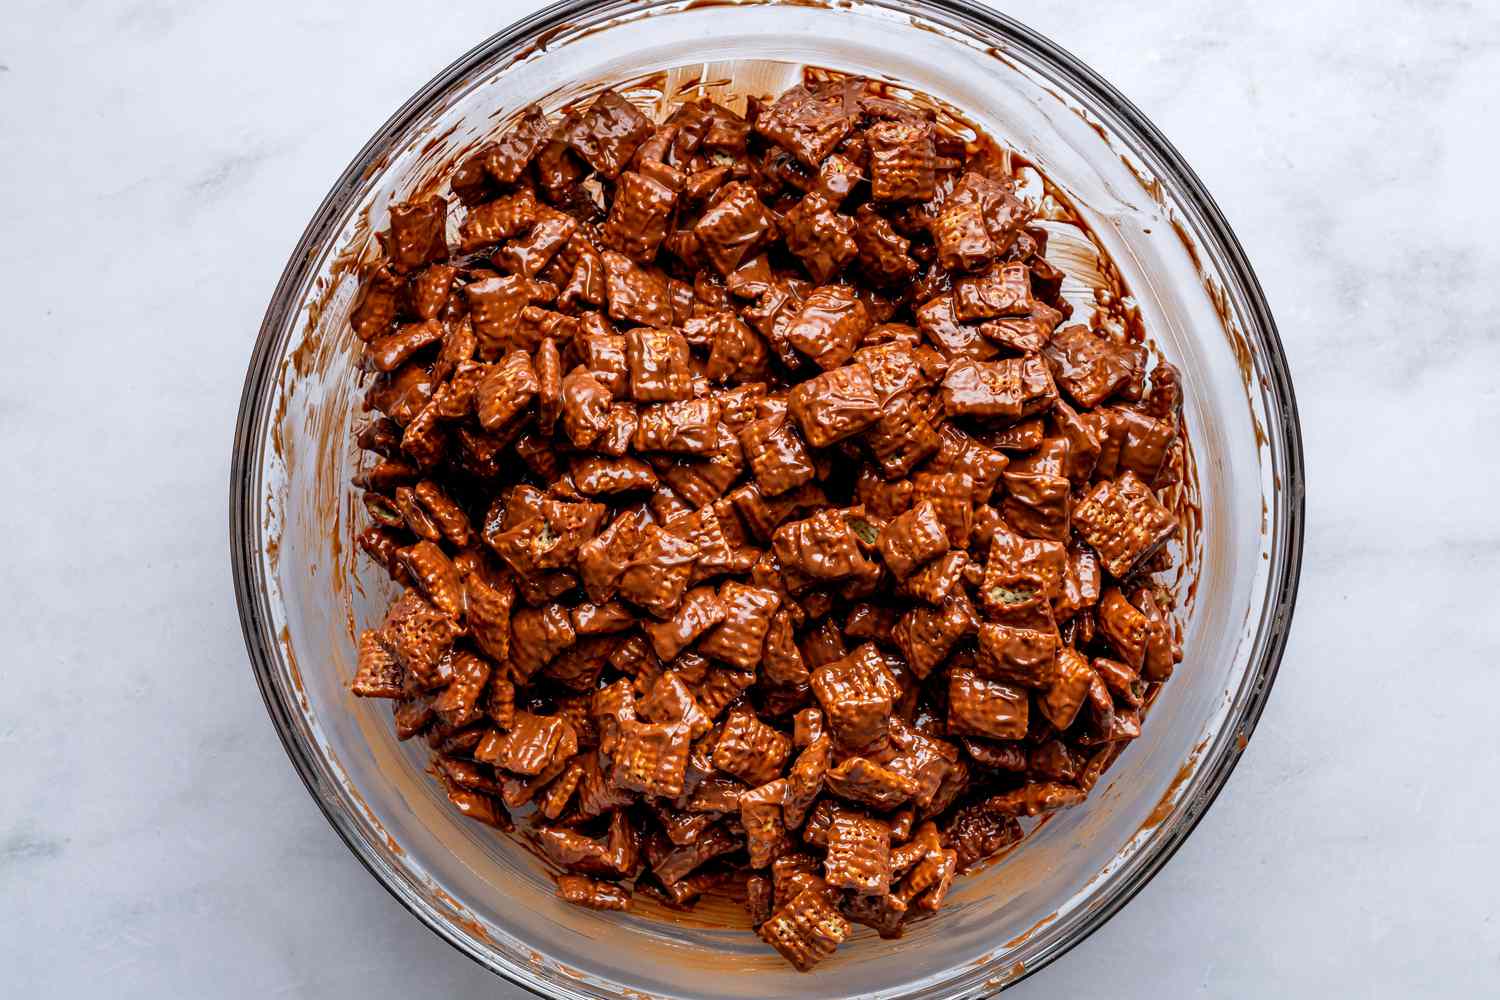 Rice cereal coated in chocolate-peanut butter mixture